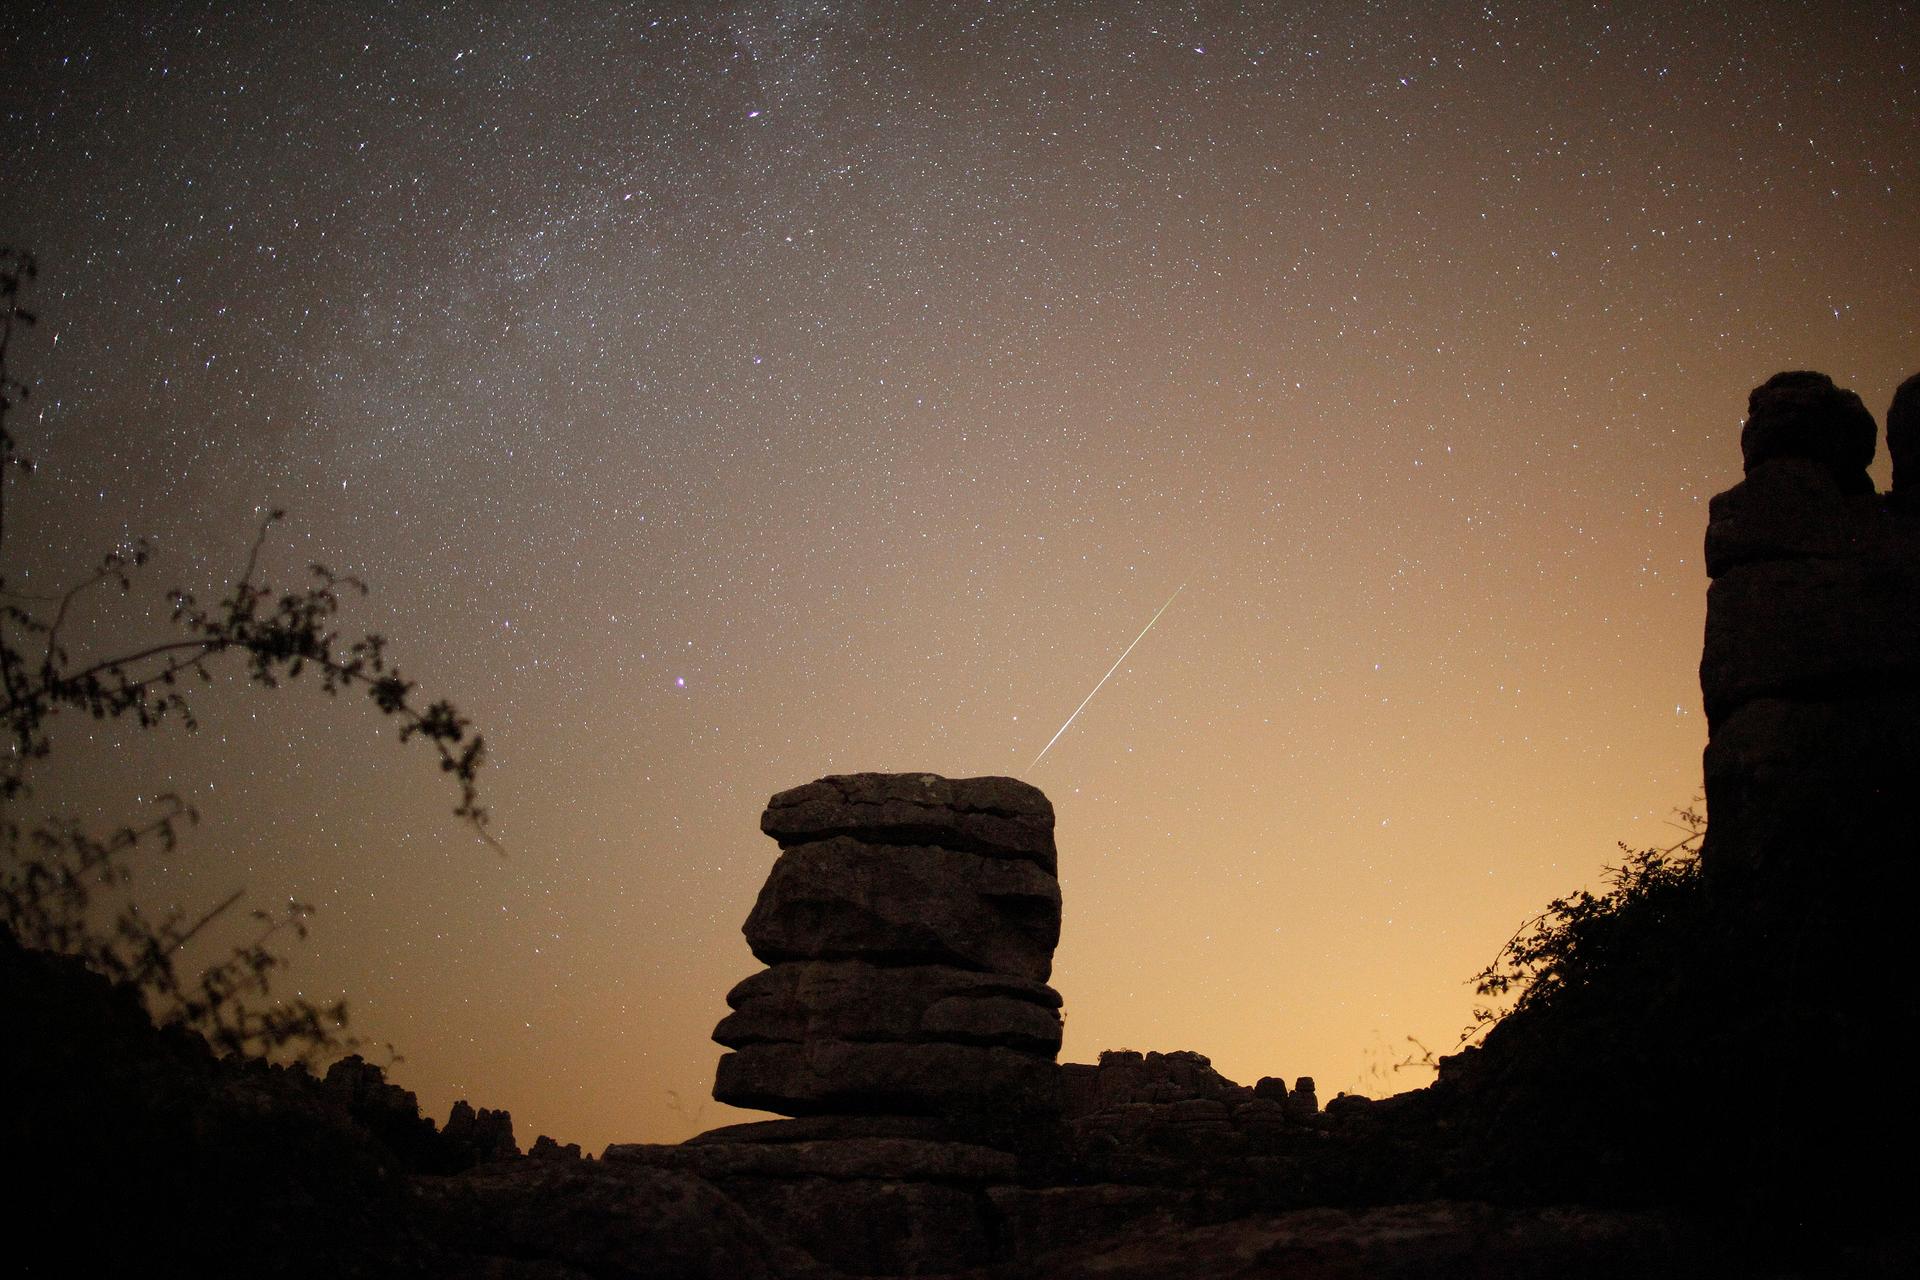 A meteor streaks past stars in the night sky over El Torcal nature park